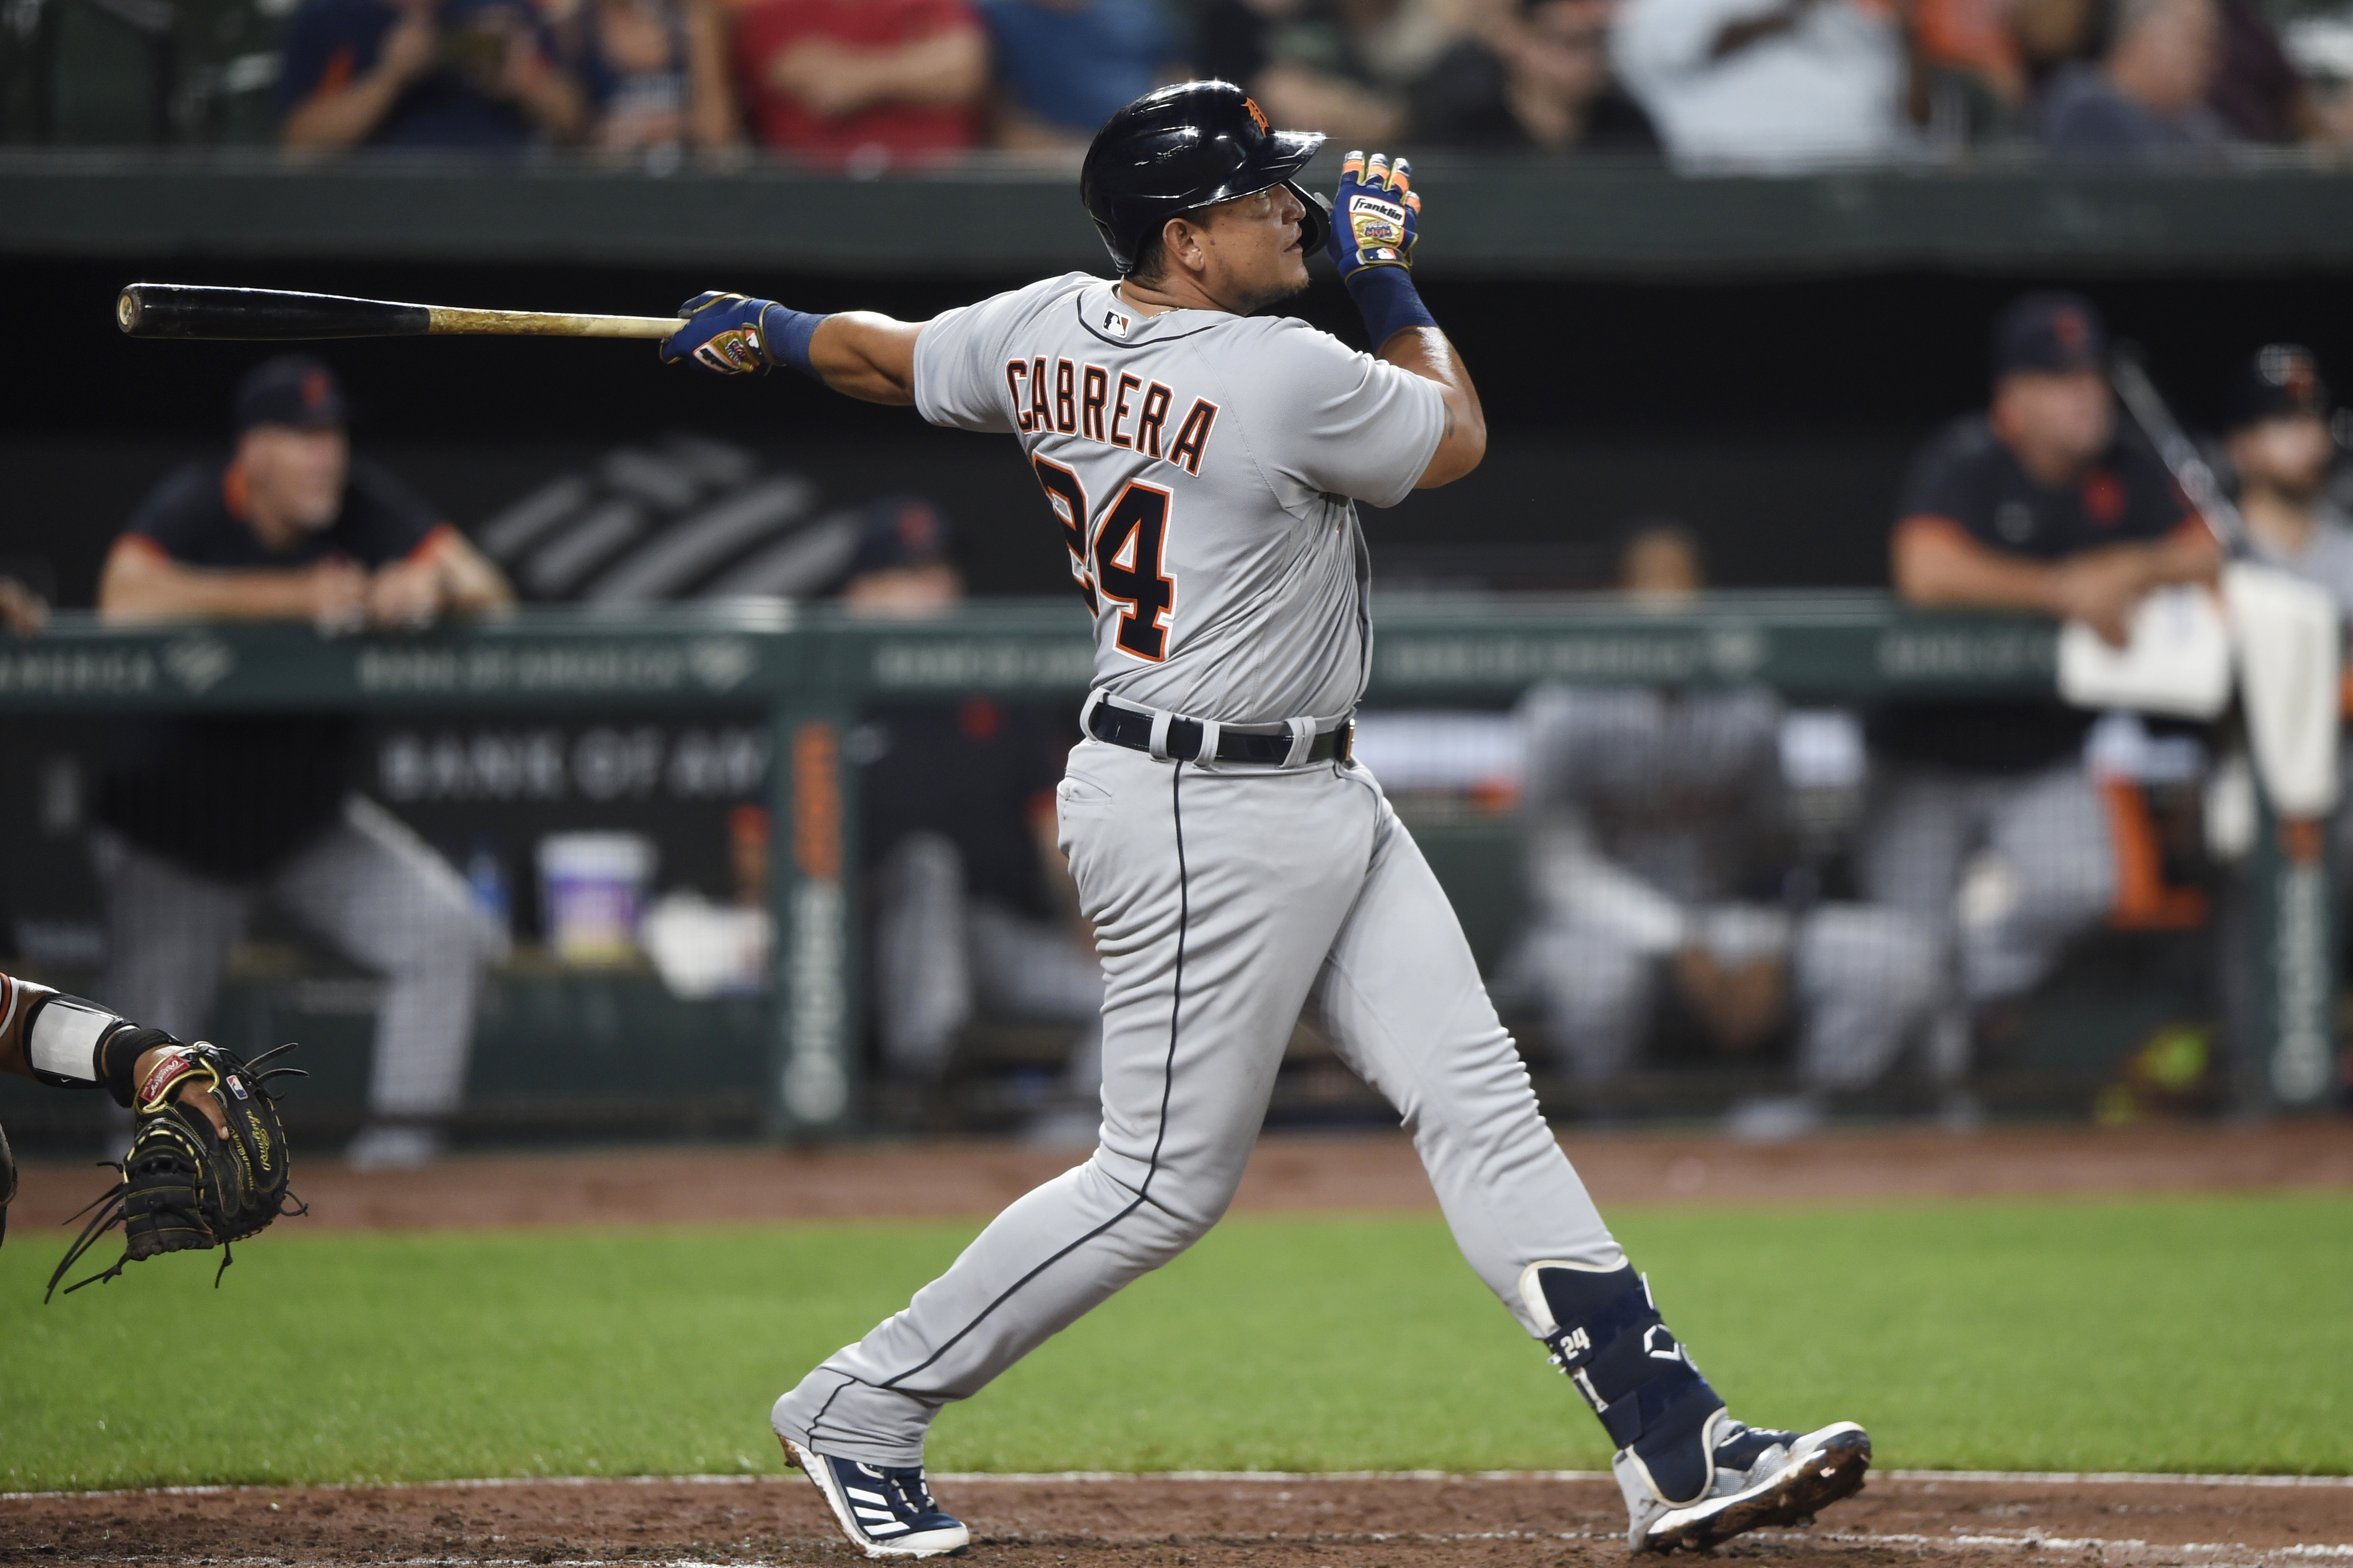 No day off: Tigers' Miguel Cabrera will try for 500 on final game of road  trip 